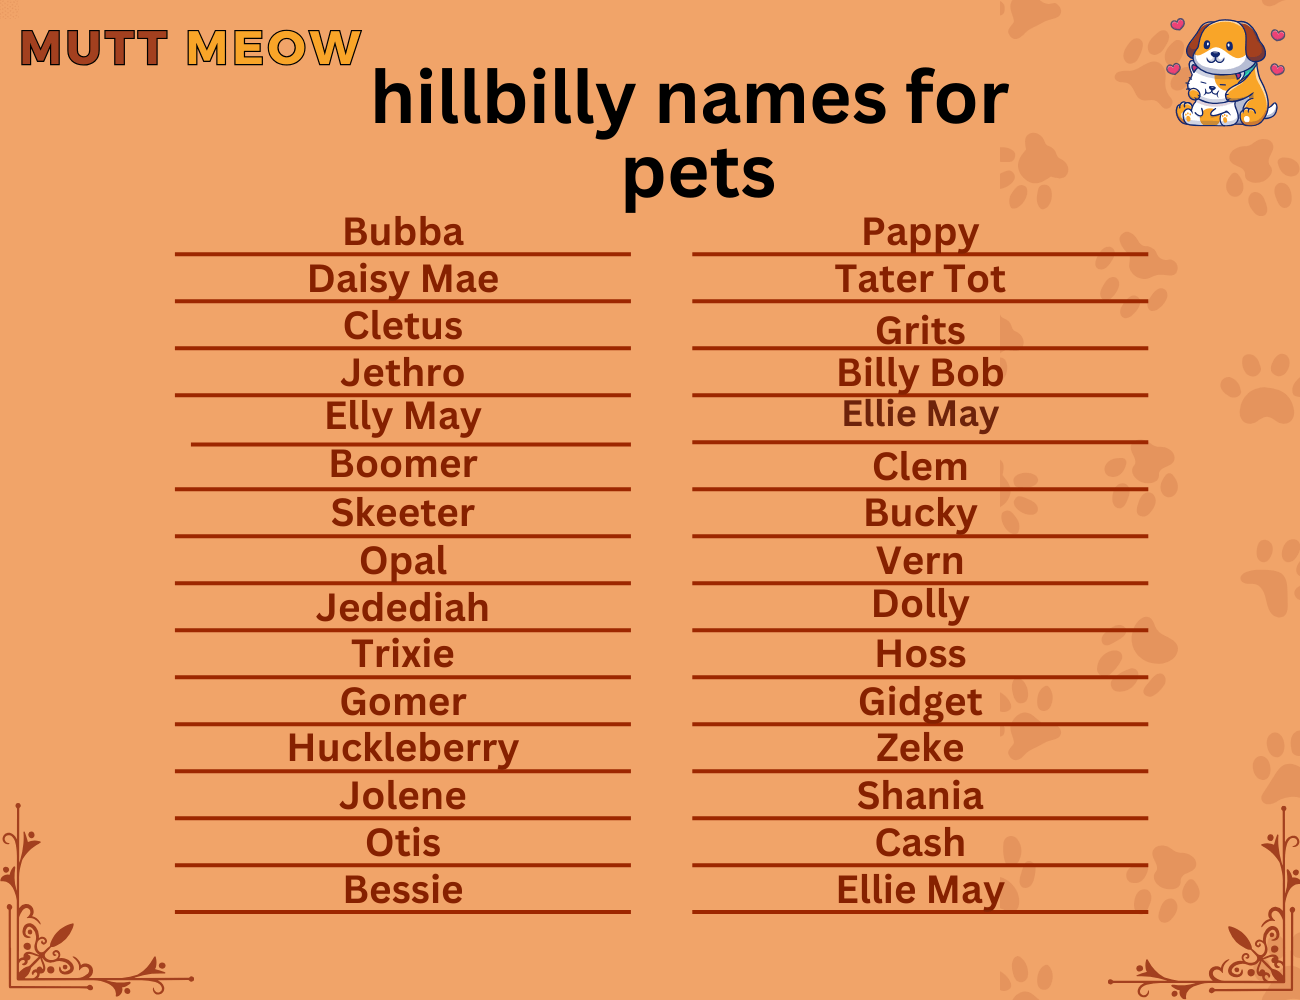 hillbilly names for pets